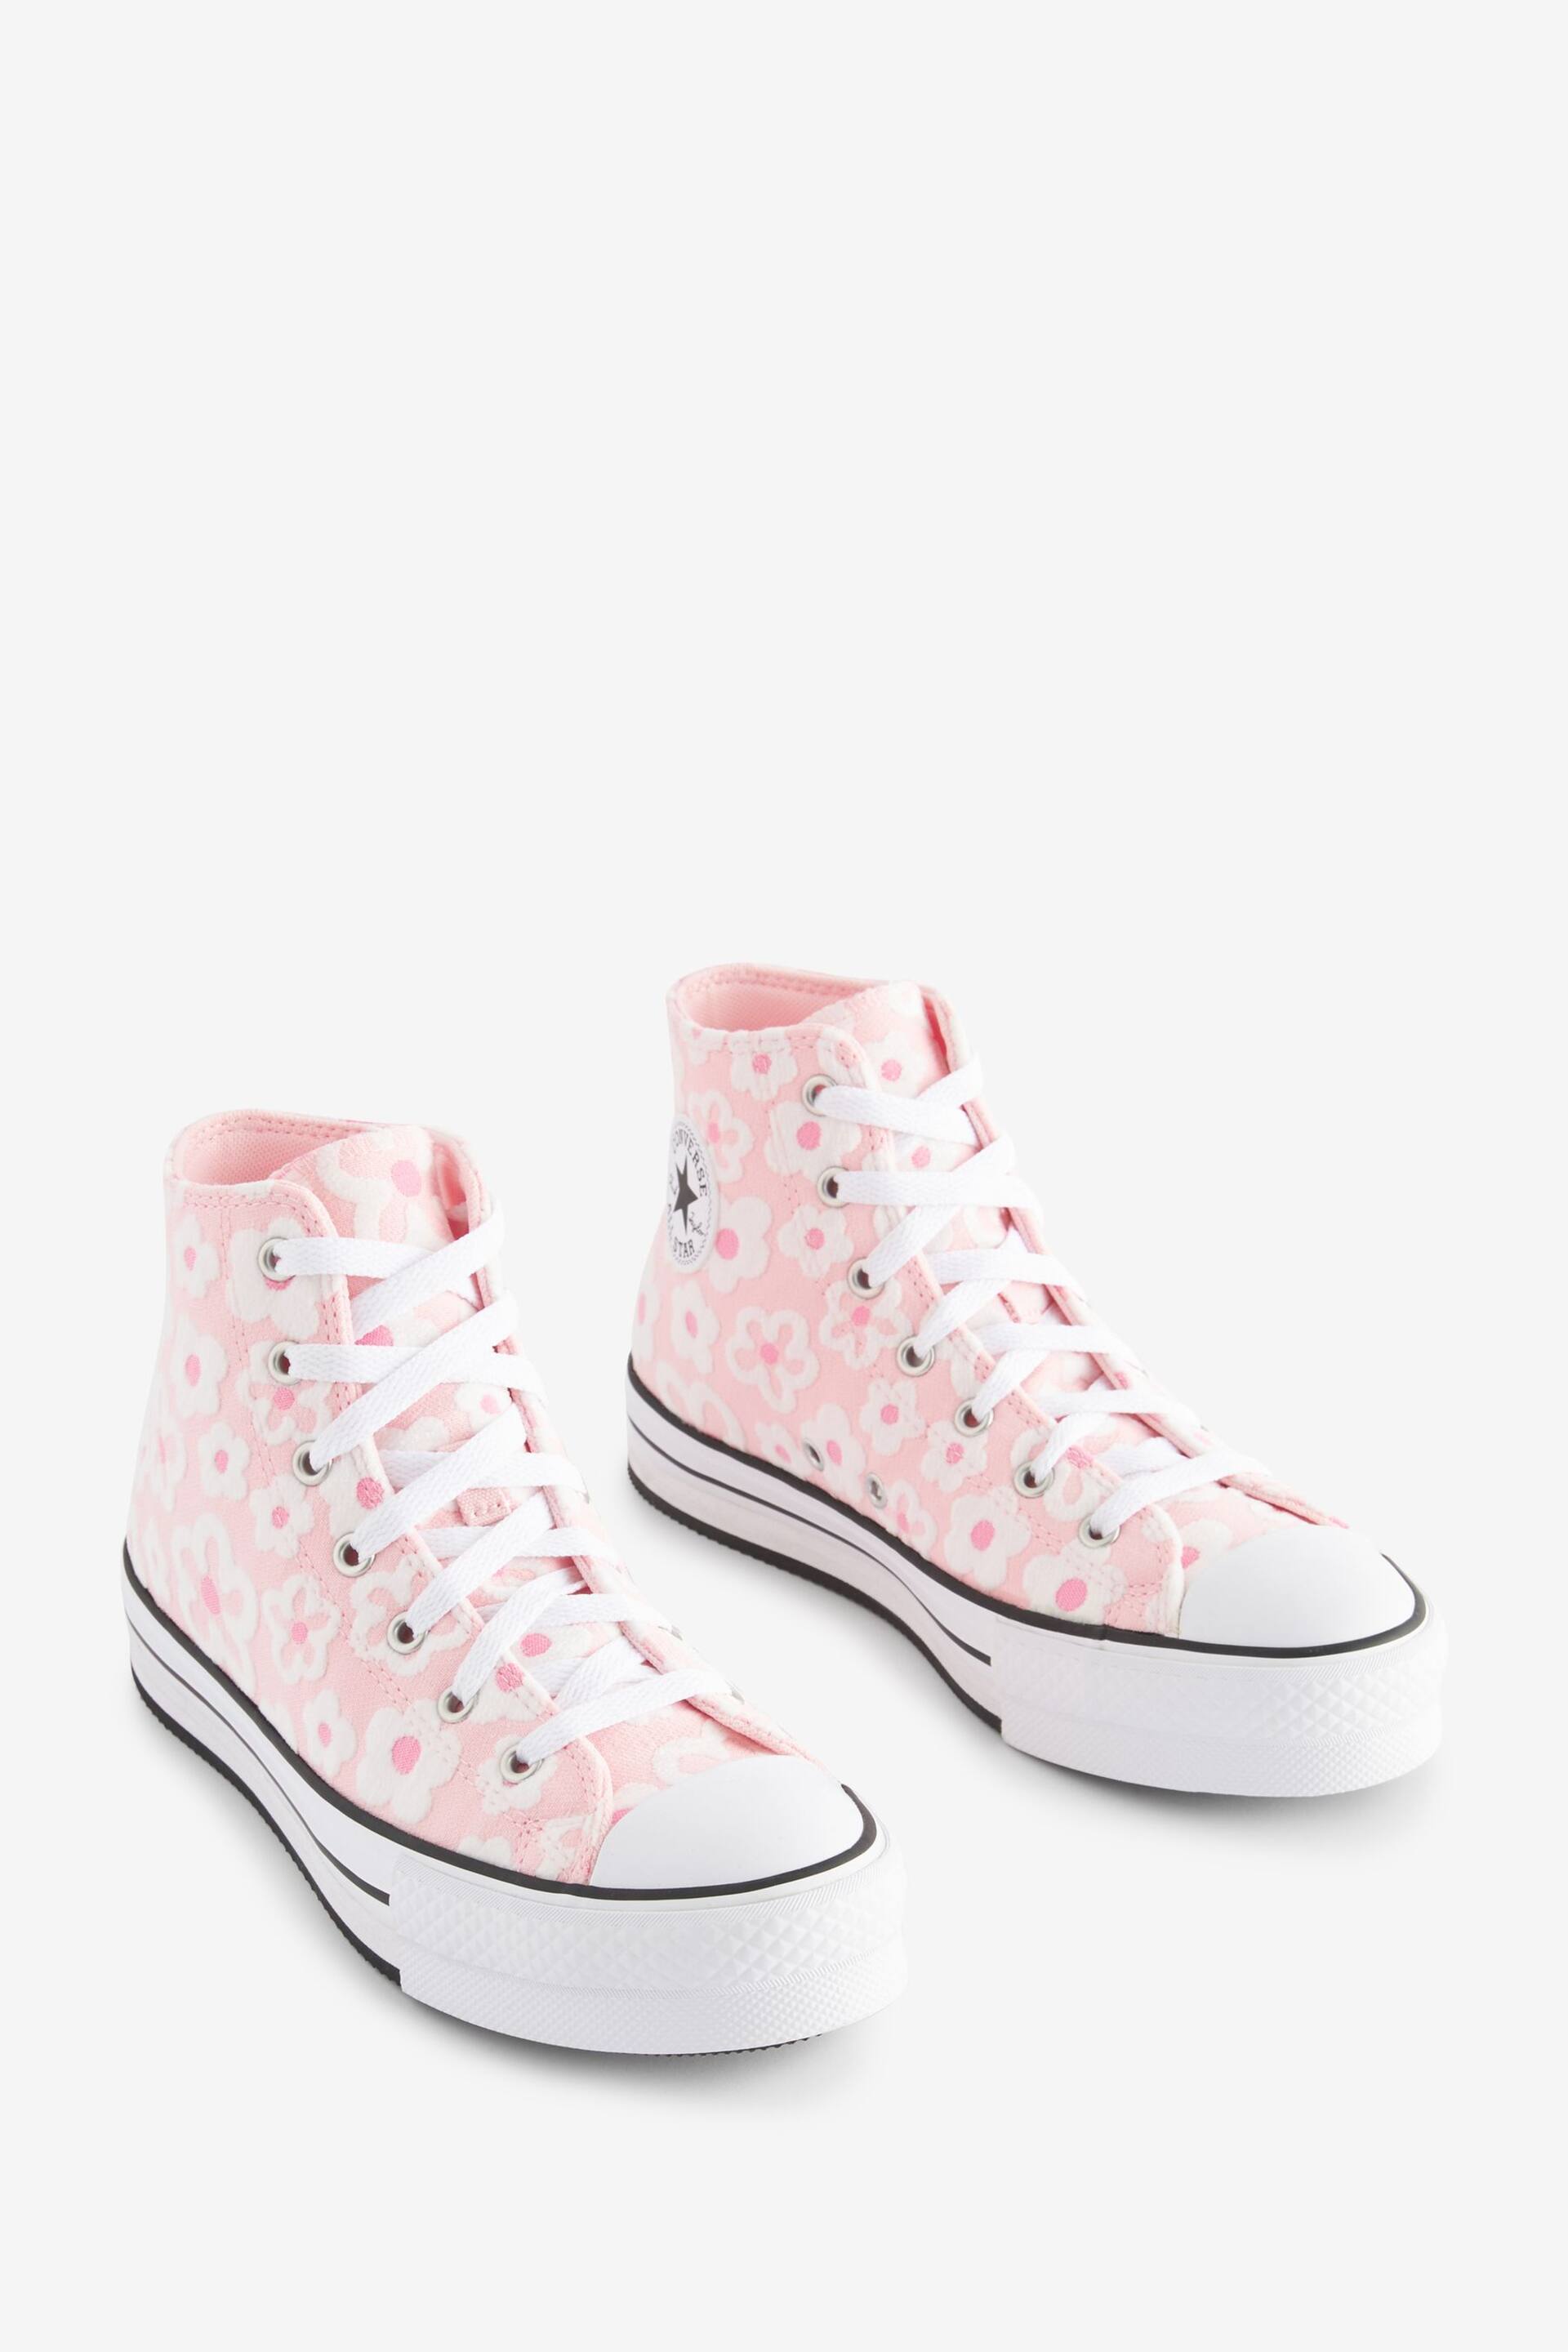 Converse Pink Floral Textured Eva Lift Youth Trainers - Image 5 of 13